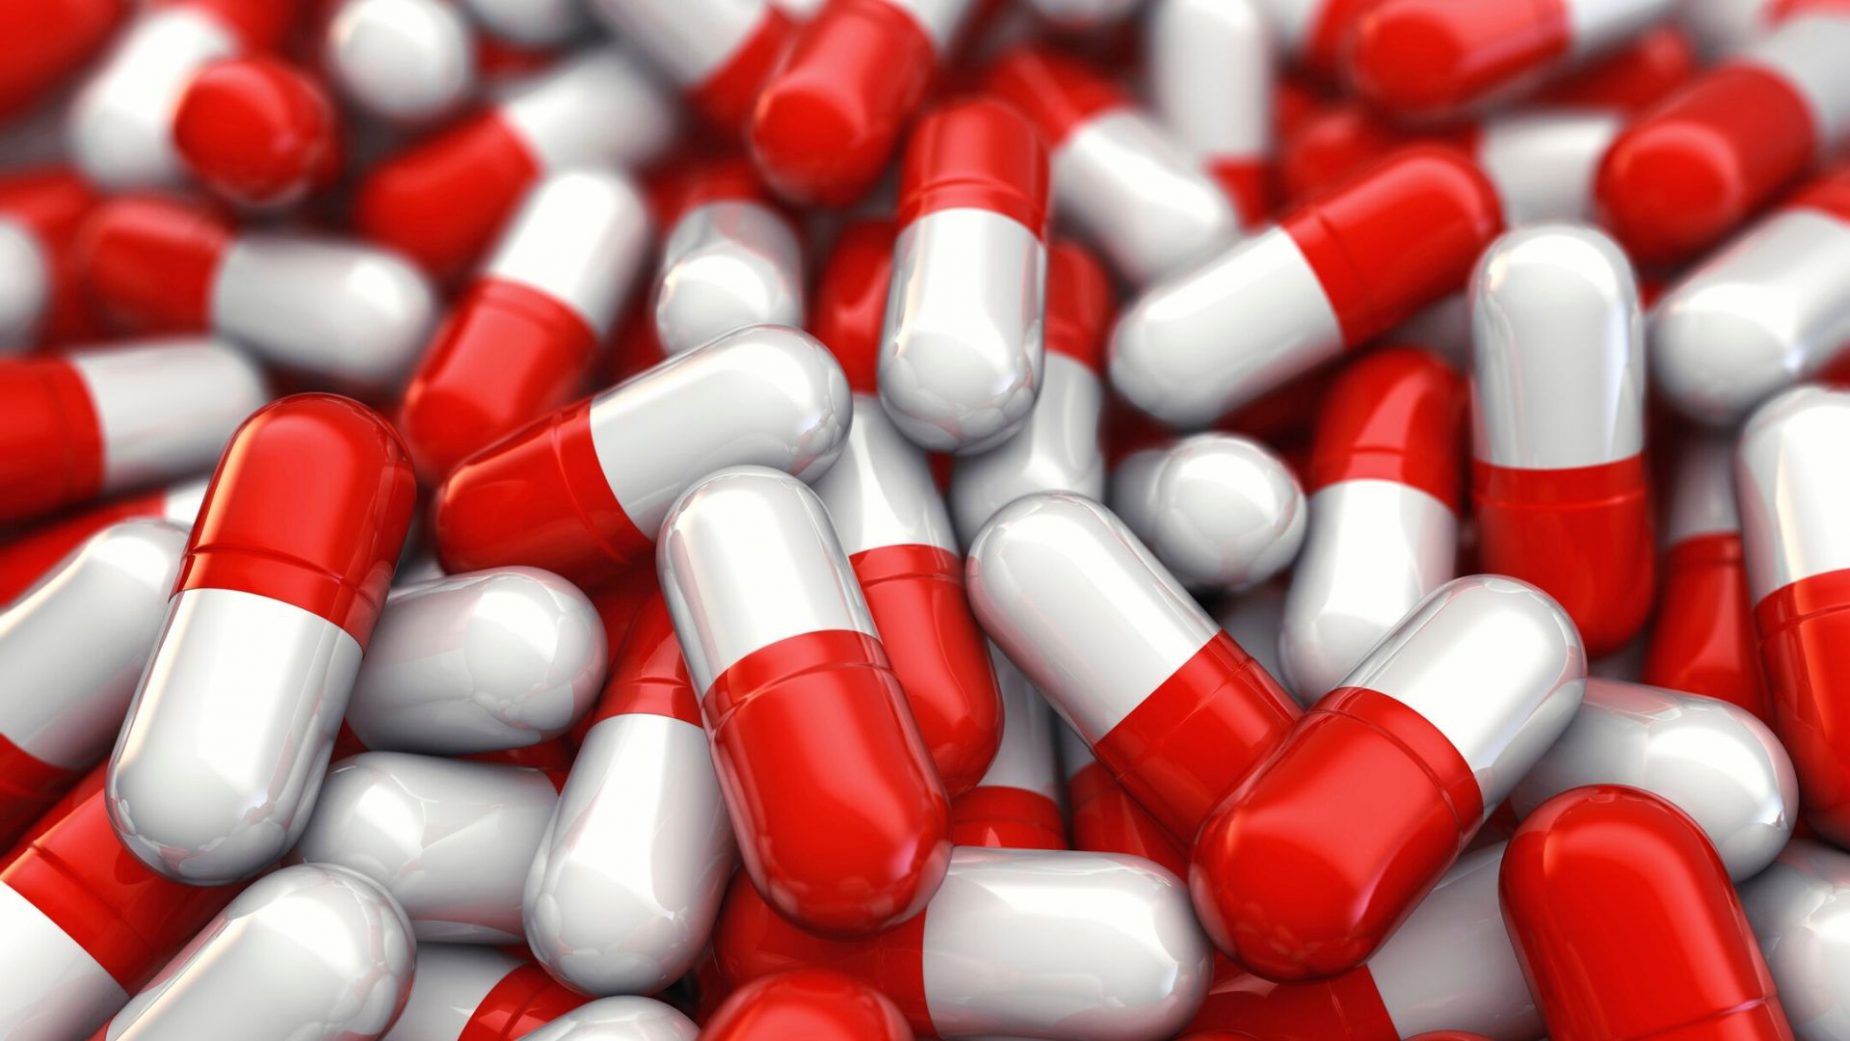 Global Generic Pharmaceuticals Market Outlook, Opportunities And Strategies